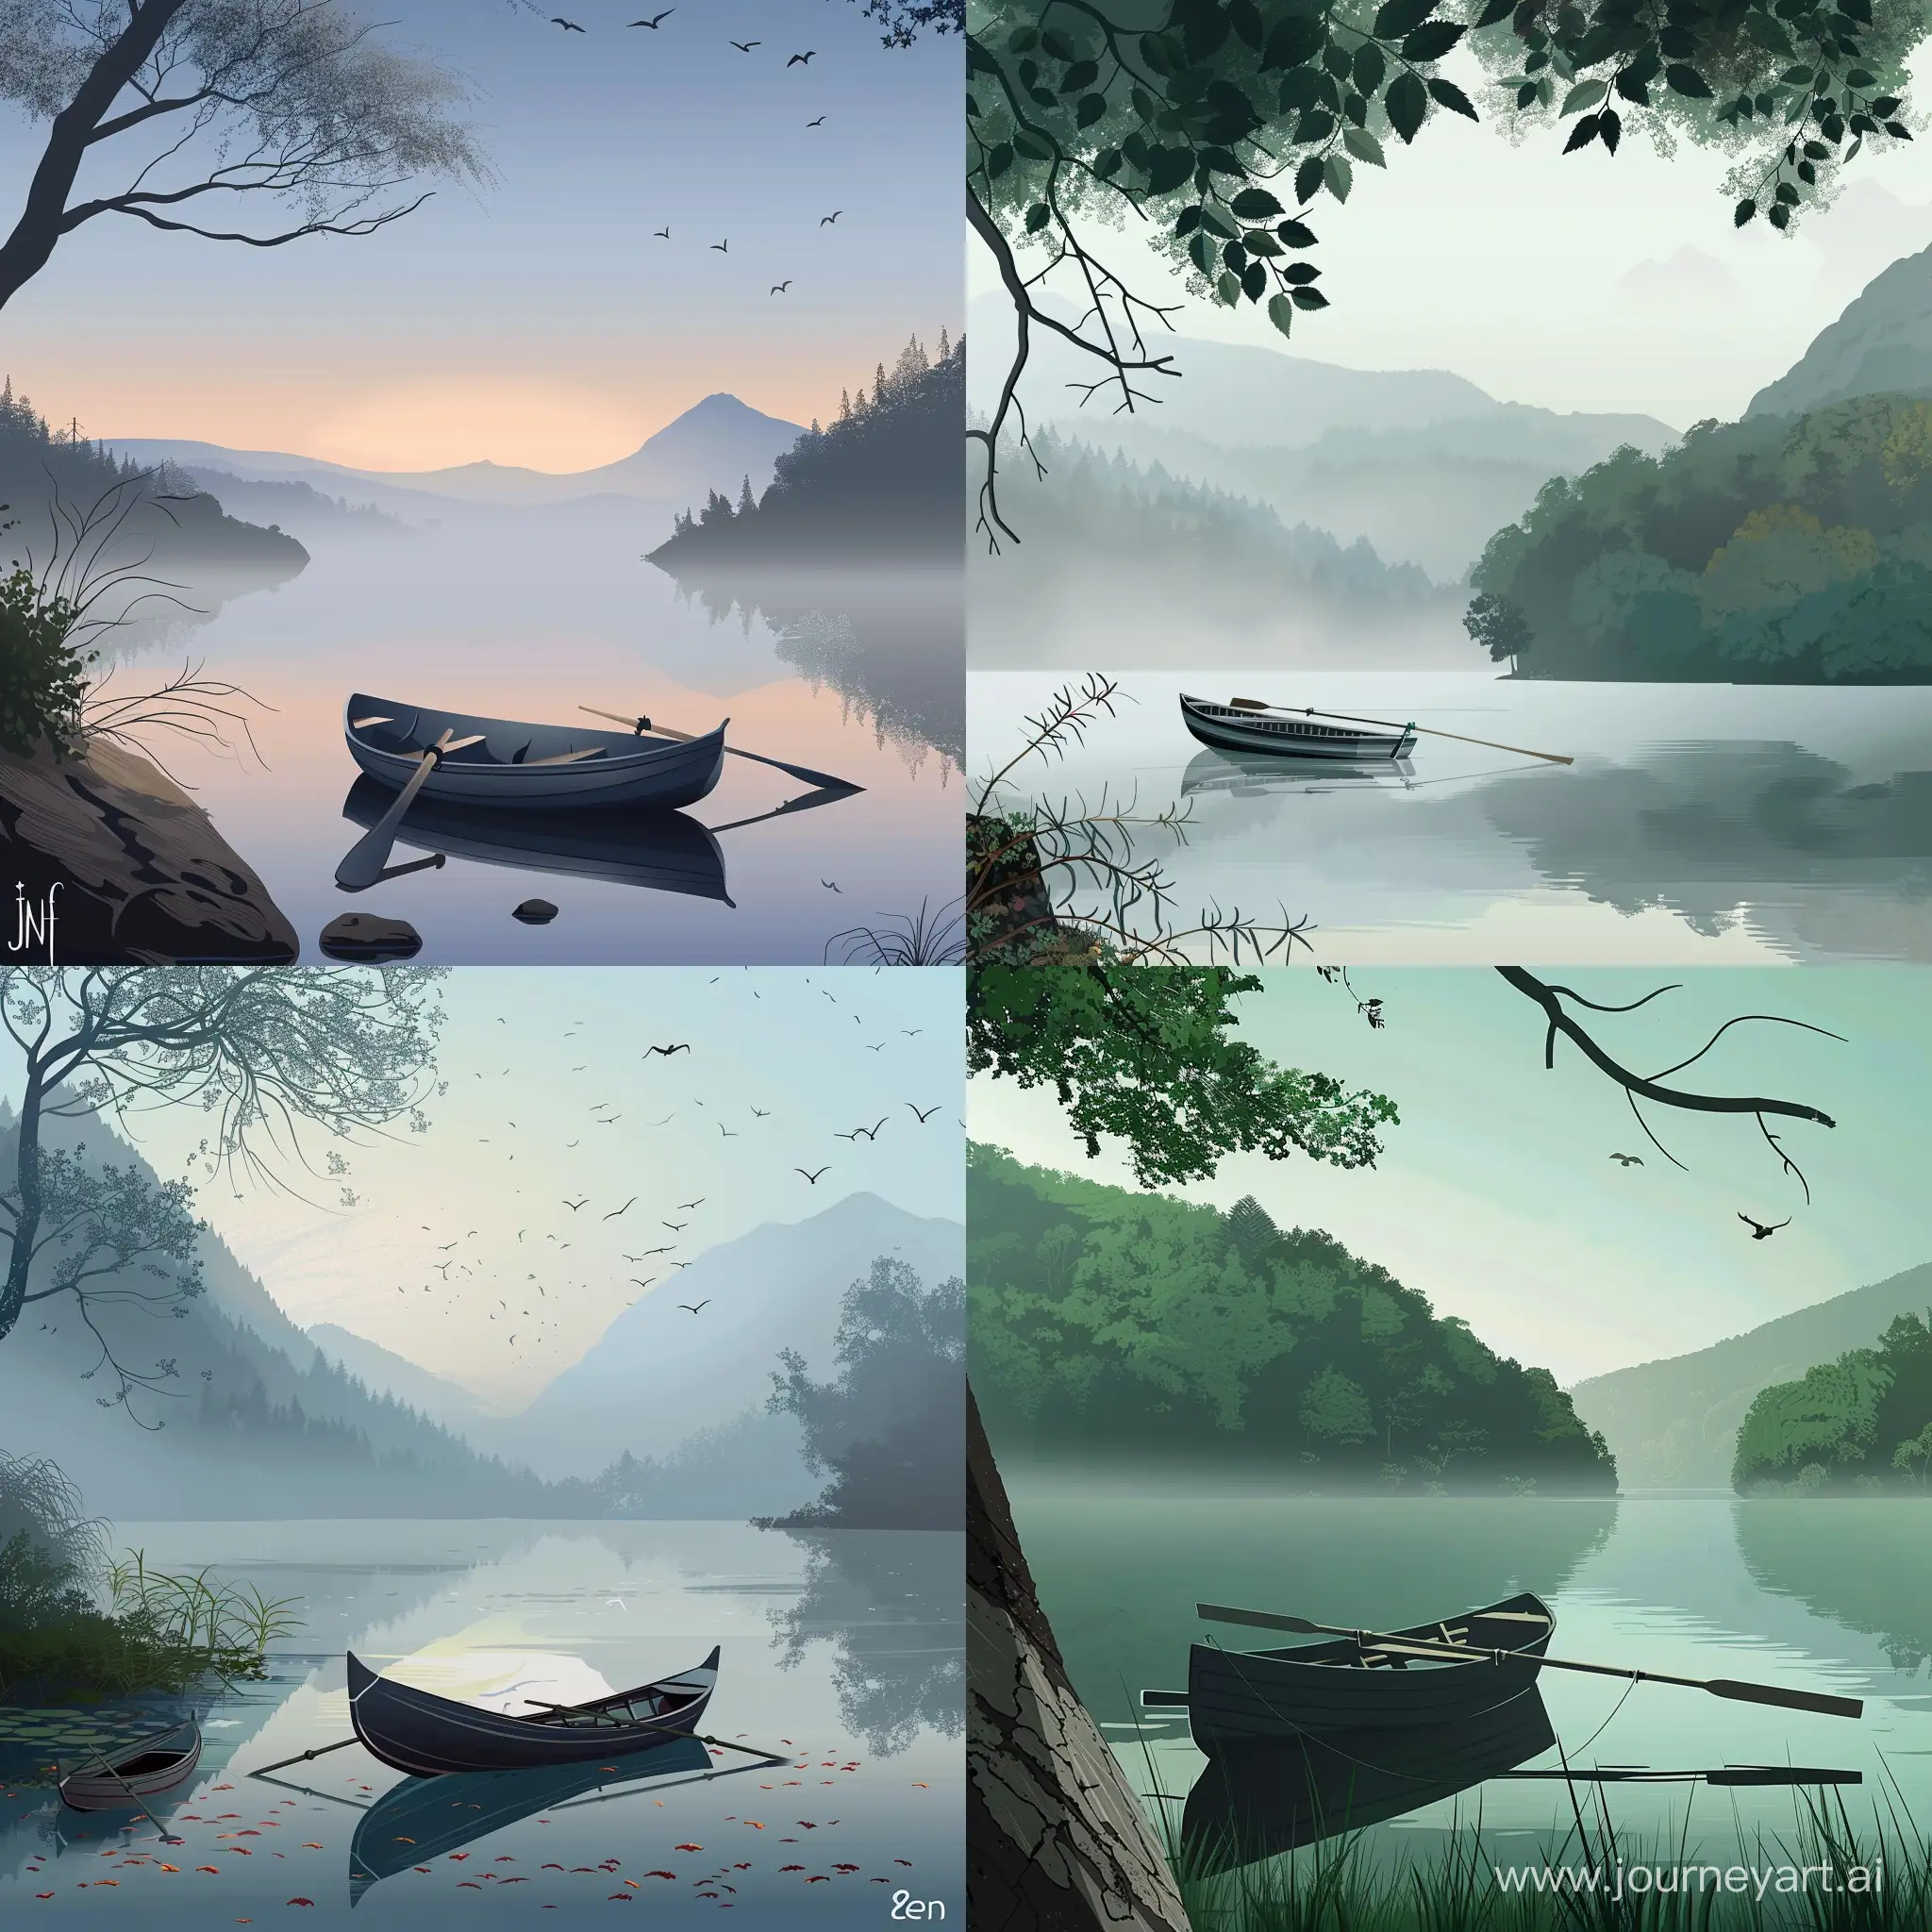 a stunningly beautiful landscape photo of a misty lake and a rowboat by photographer Ian Ely, in cartoon vector style